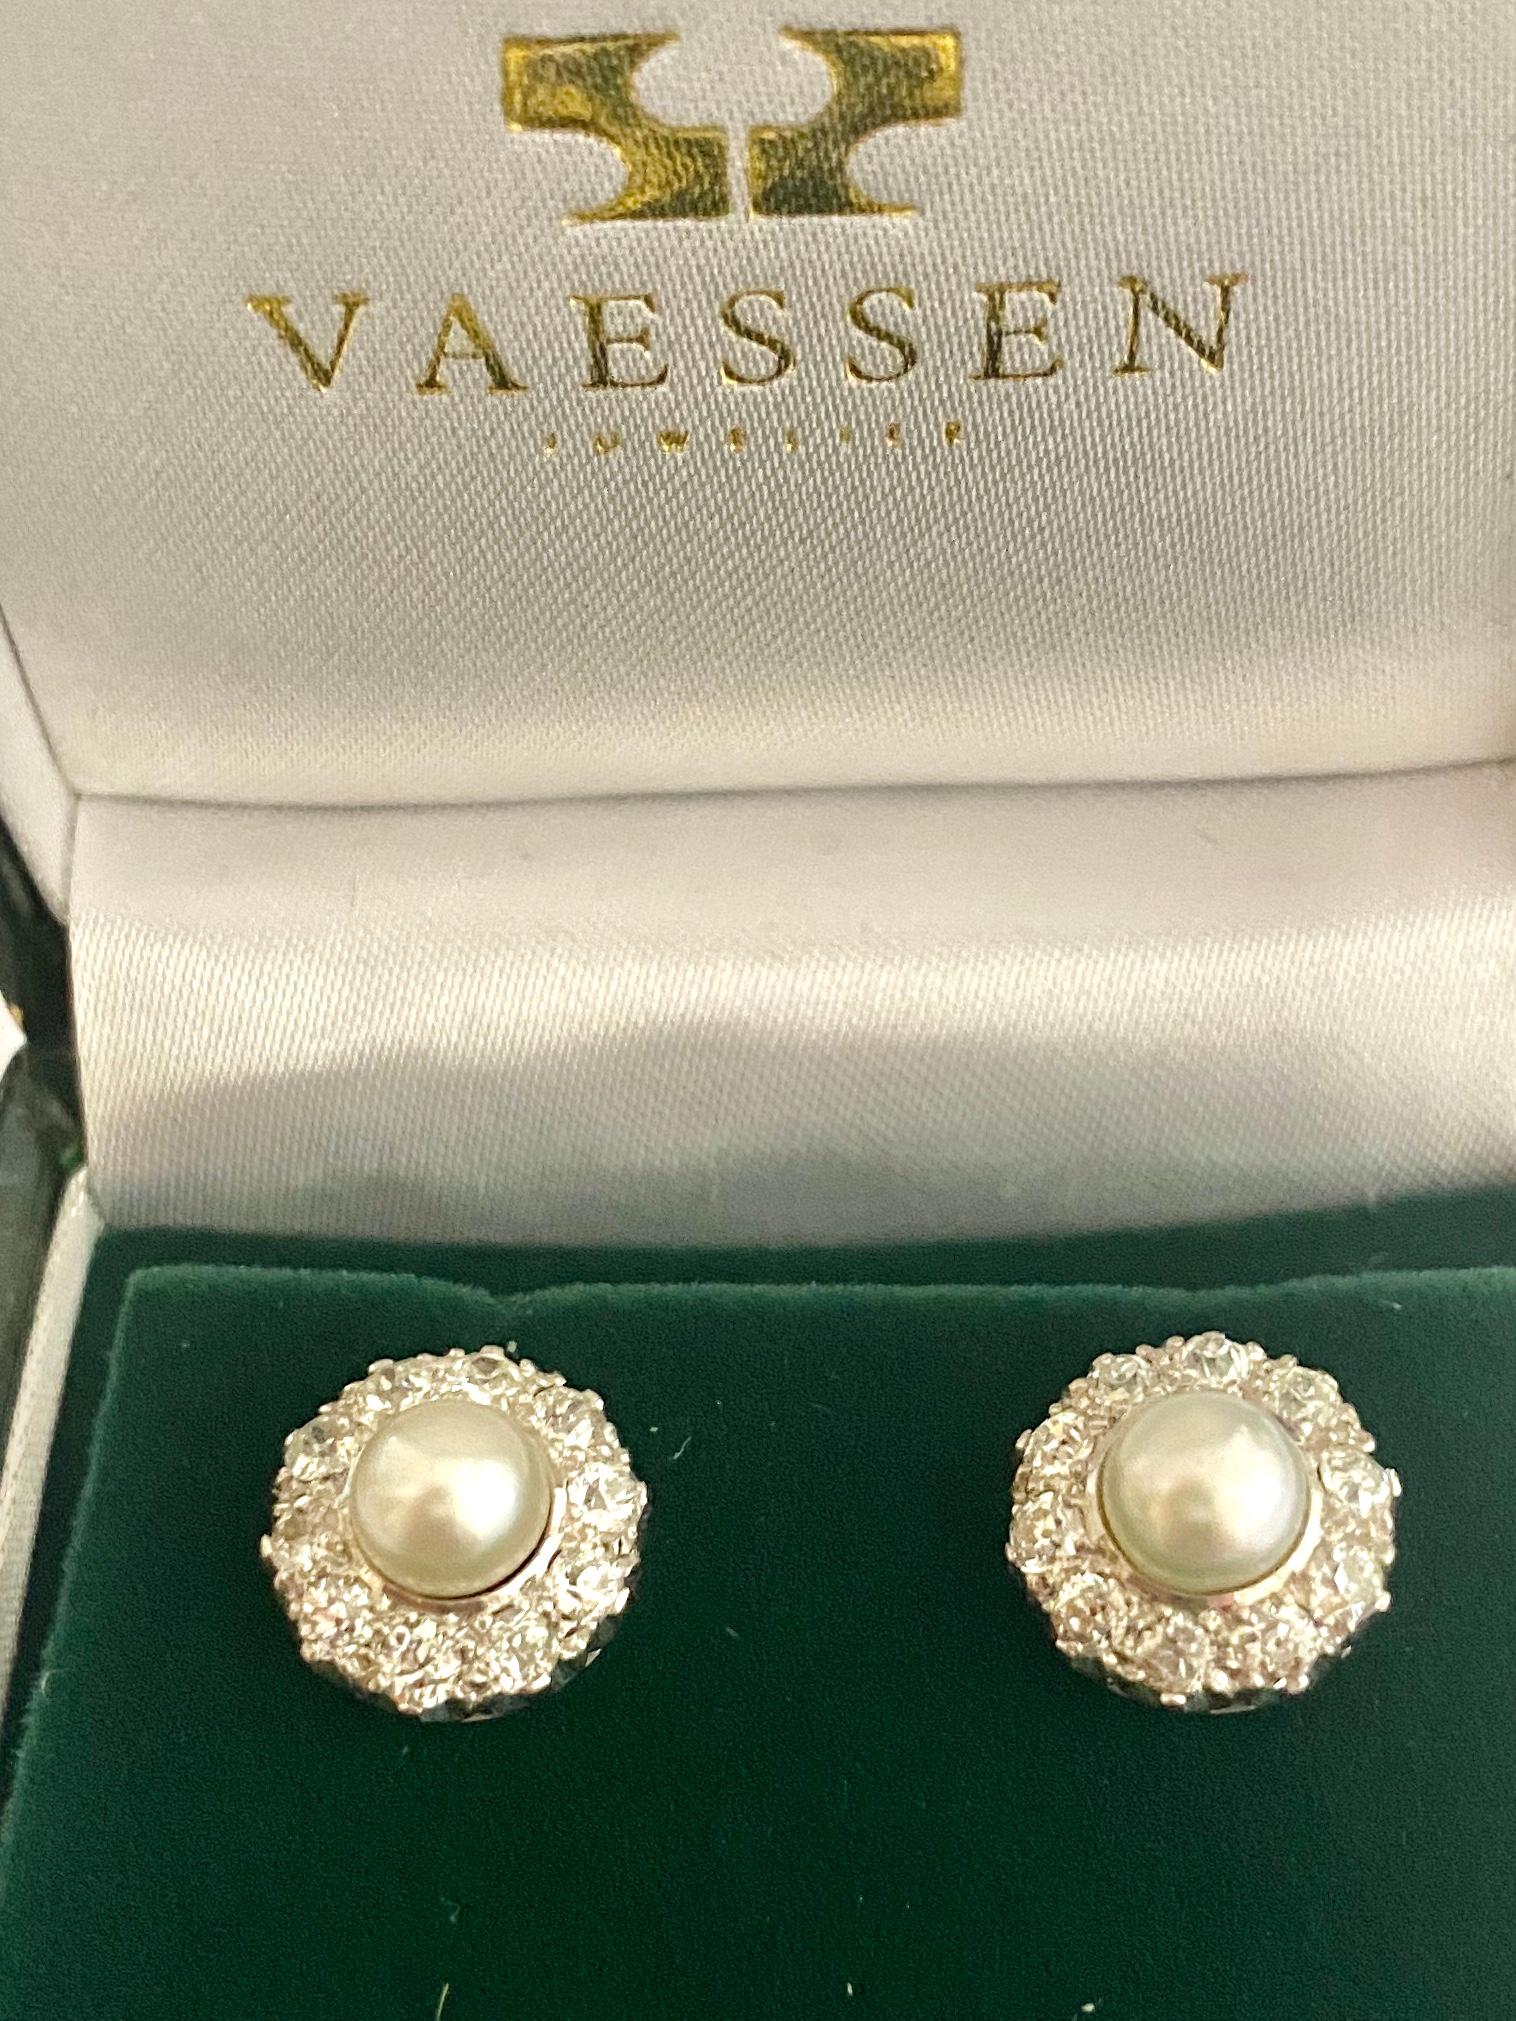 One '1' Pair of 14 Karat White Gold Ear Rings, Round Cult Pearls and 20 Diamonds 3